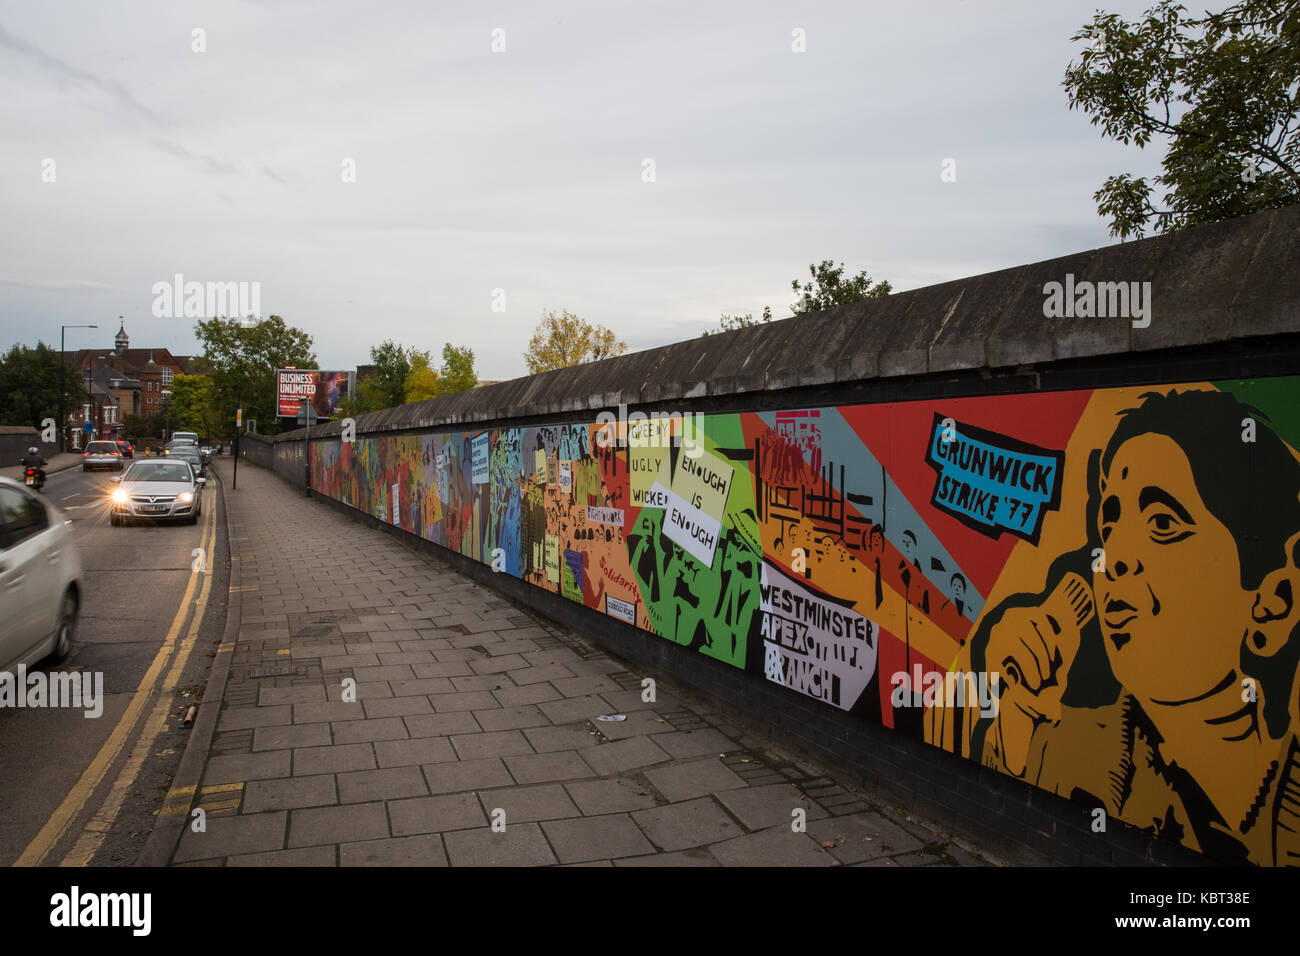 London, UK. 30th September, 2017. One of two colourful murals unveiled today in Dollis Hill to commemorate the 40th anniversary of the Grunwick strike. It was designed by artist Anna Ferrie in collaboration with more than 60 participants at community workshops to reflect both memories of the strike for those who were present and the hope it represents for younger generations. Credit: Mark Kerrison/Alamy Live News Stock Photo